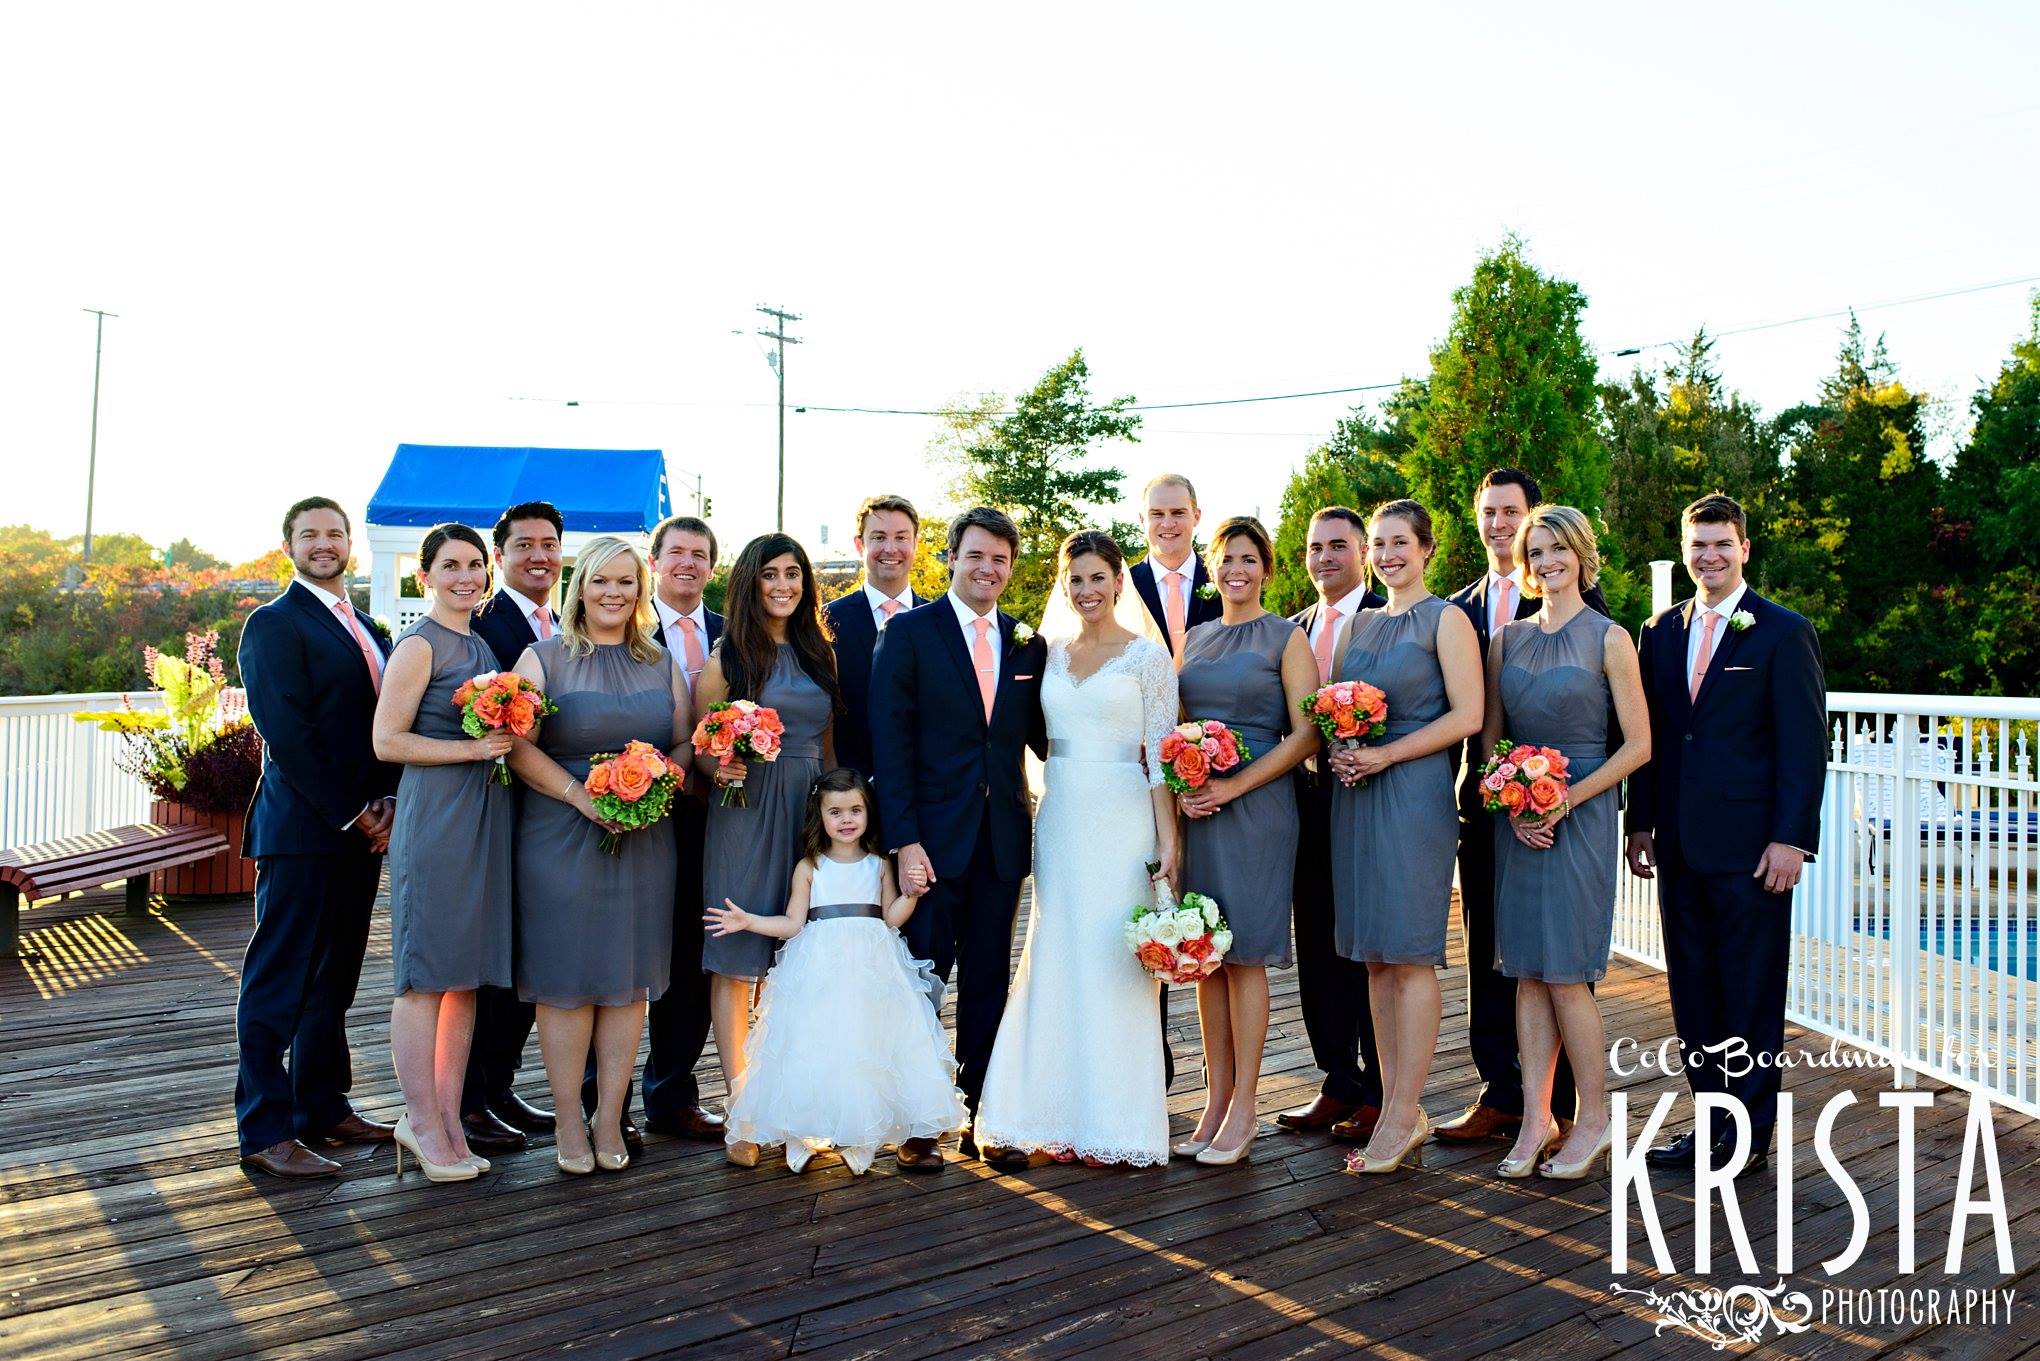 wedding-party-photo-on-dock-wed-on-canvas-coral-bridal-bouquet-gray-bridesmaid-dresses-wentworth-by-the-sea-wedding-ben-keys